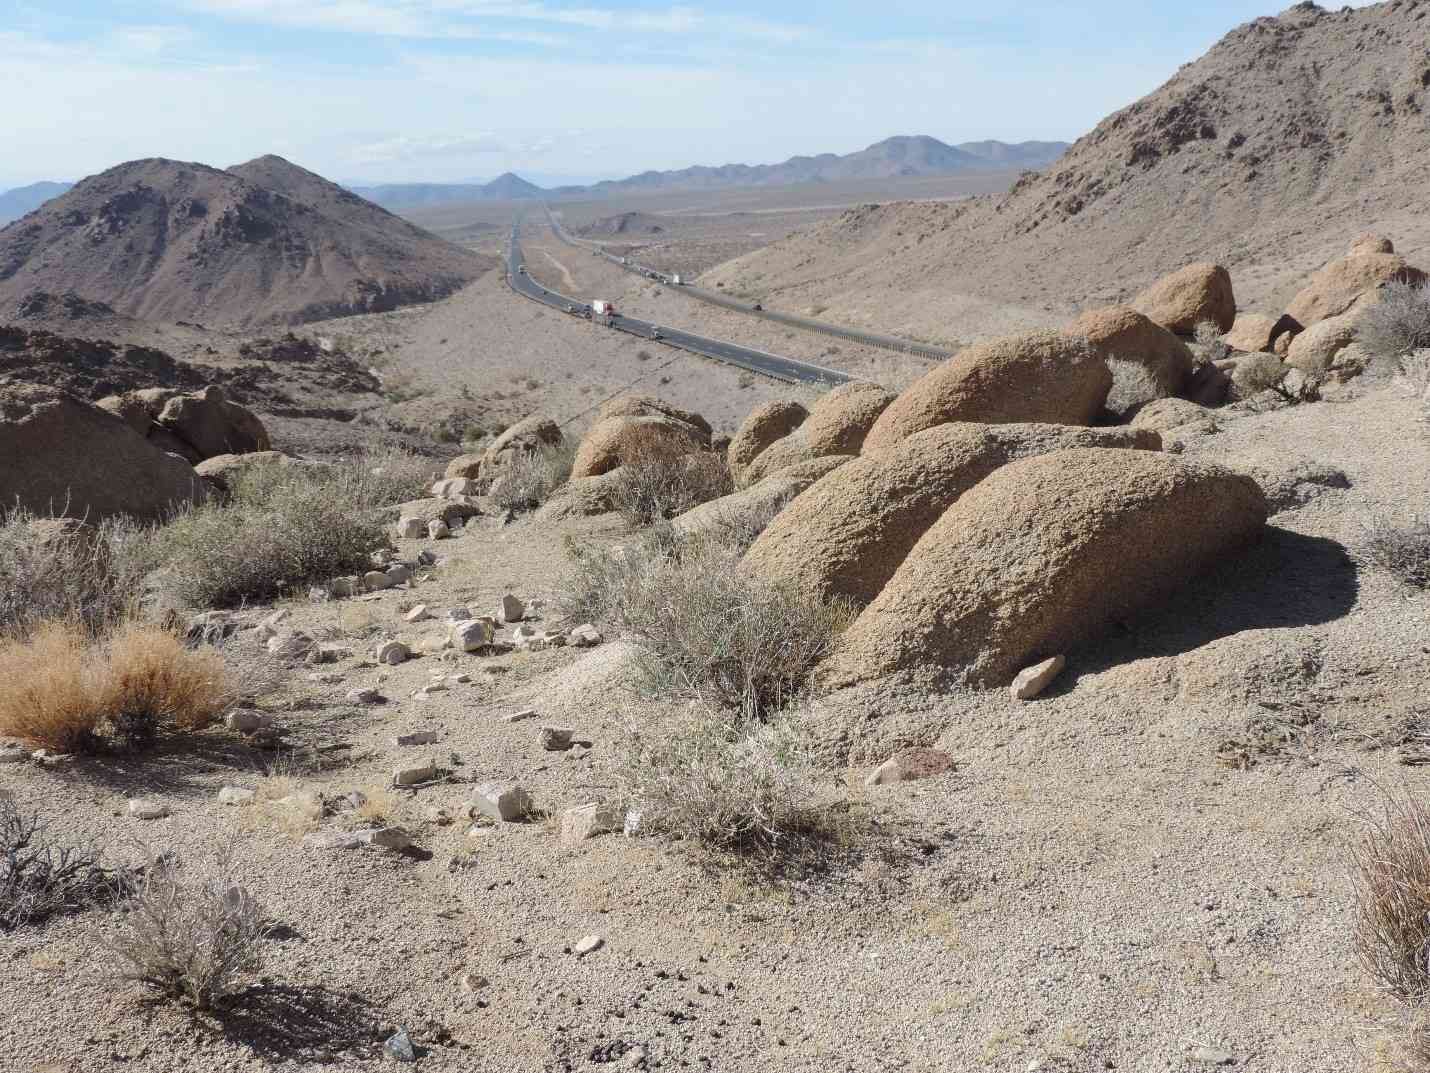 Desert bighorn sheep daybeds in the Marble Mountains overlooking Interstate Highway 40, between the Marble and Granite Mountains in the California Desert.